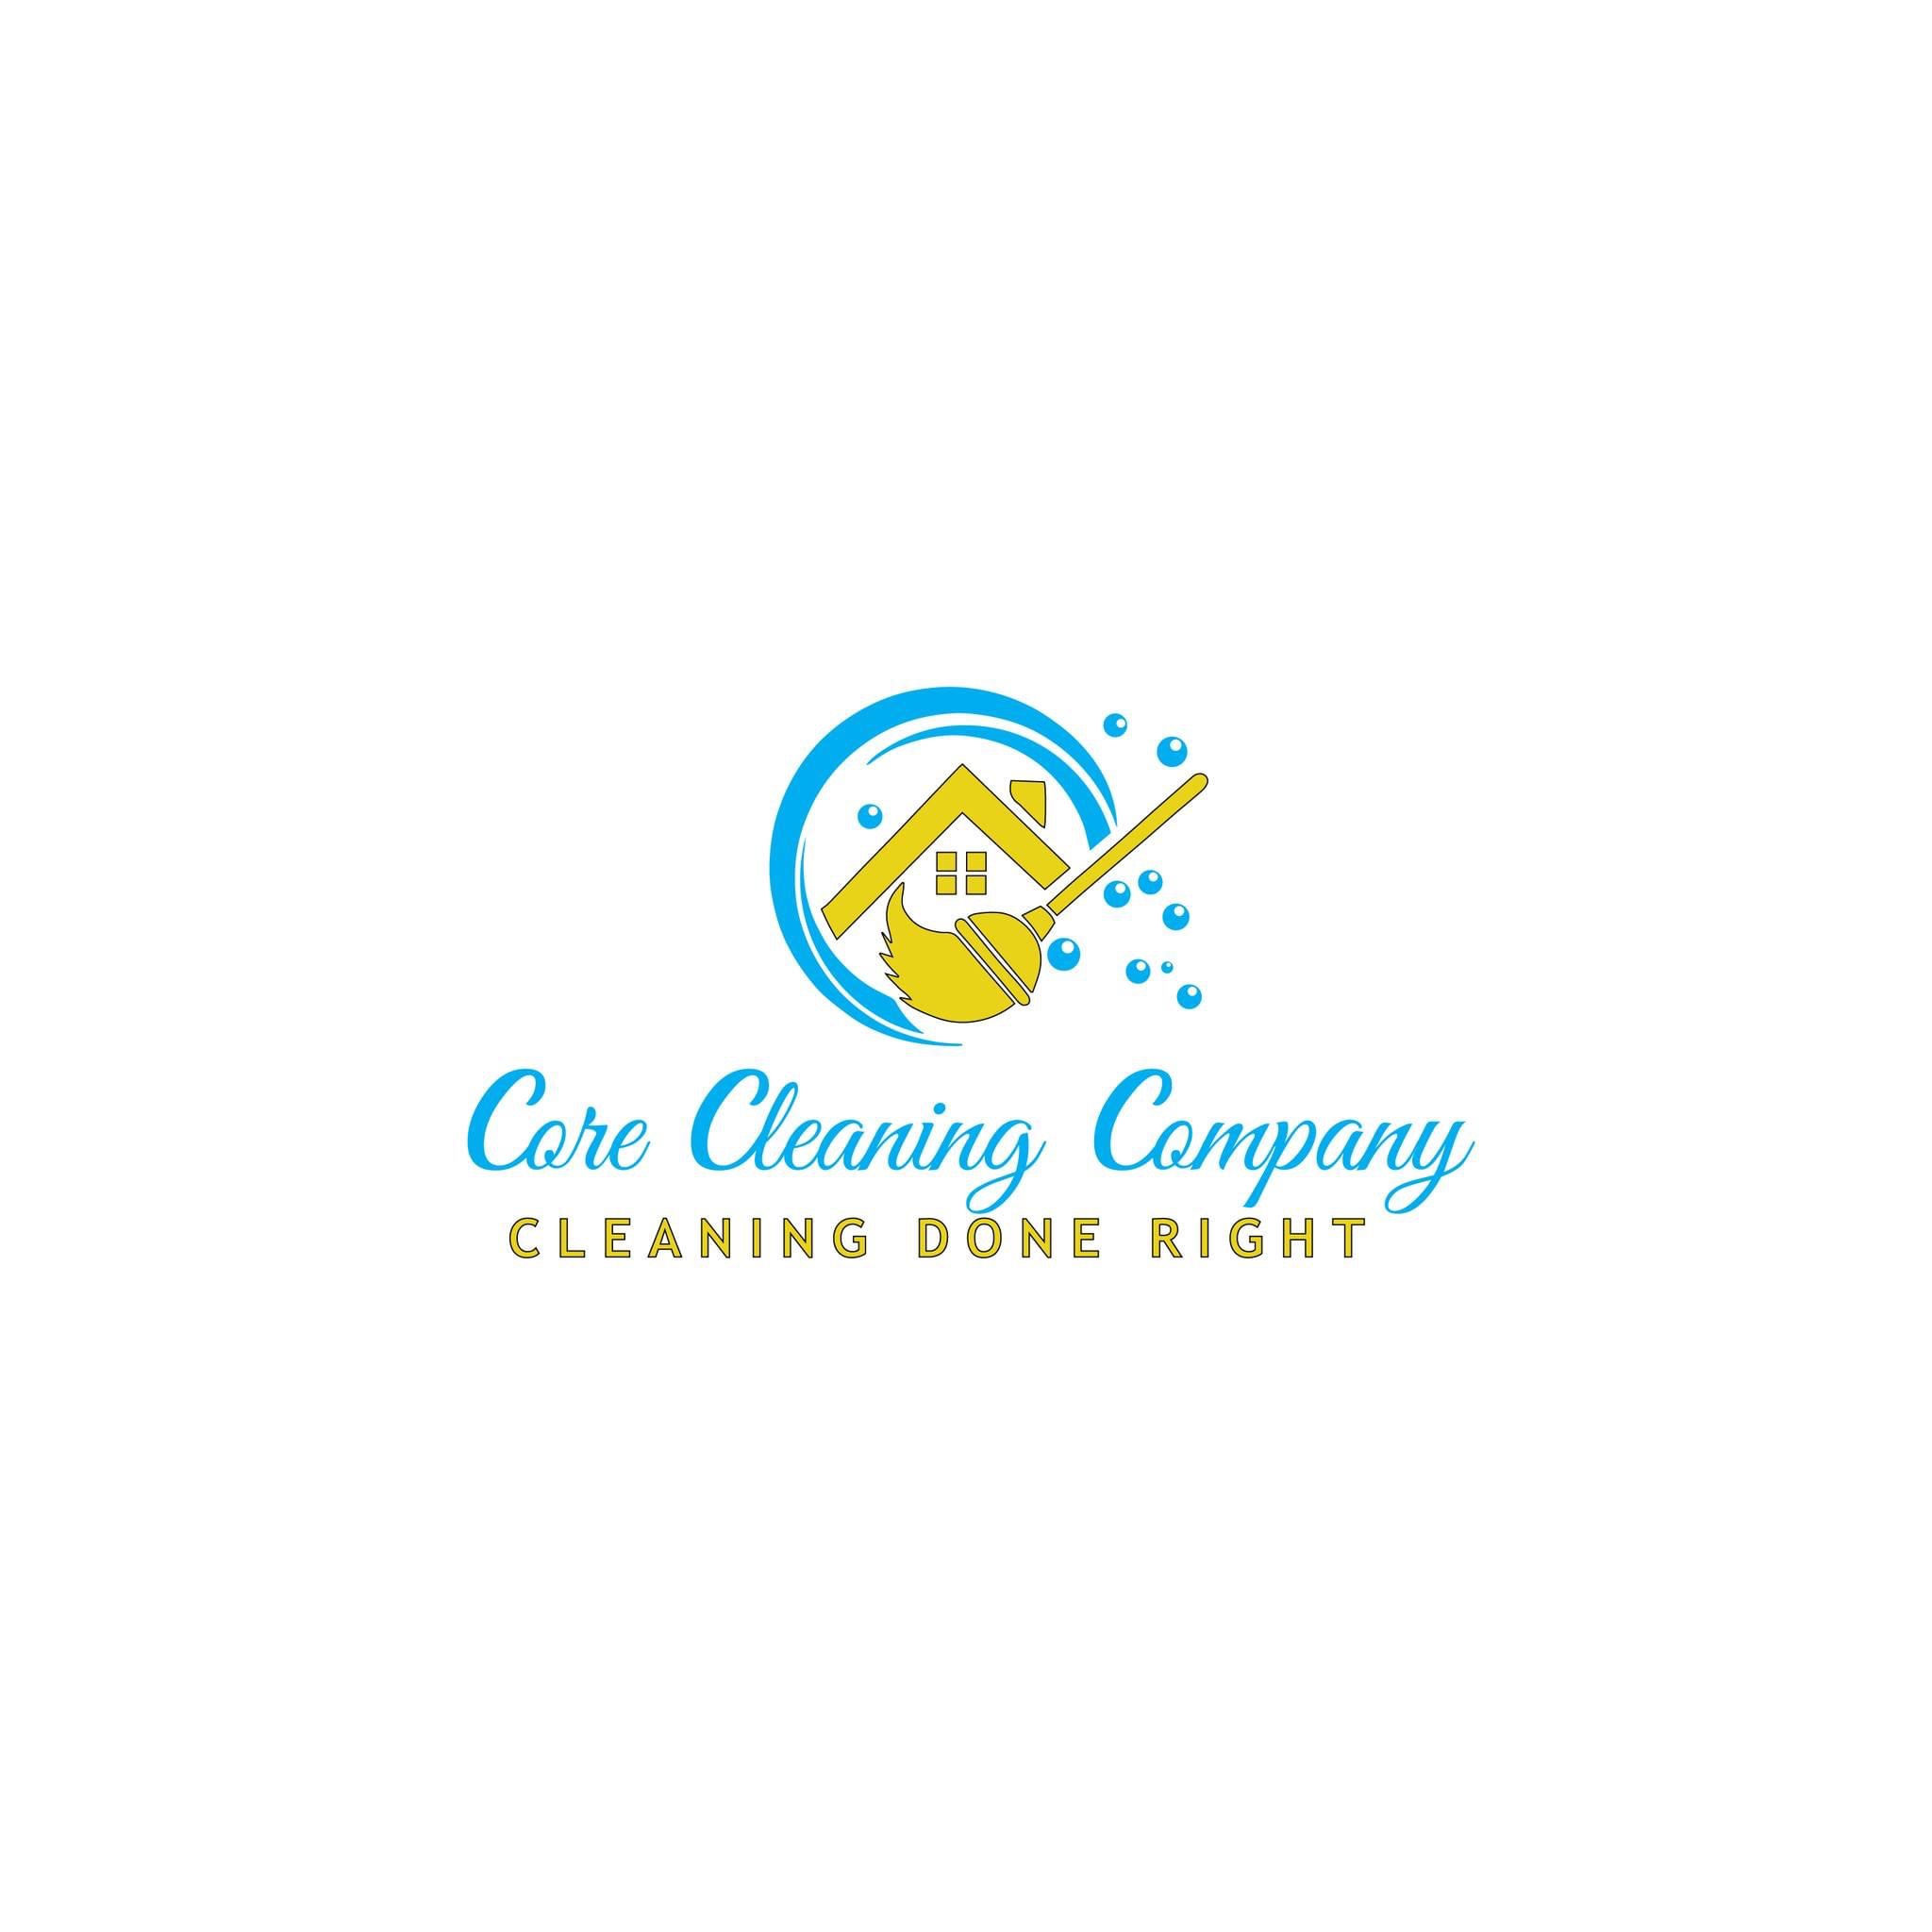 Core Cleaning Company Logo